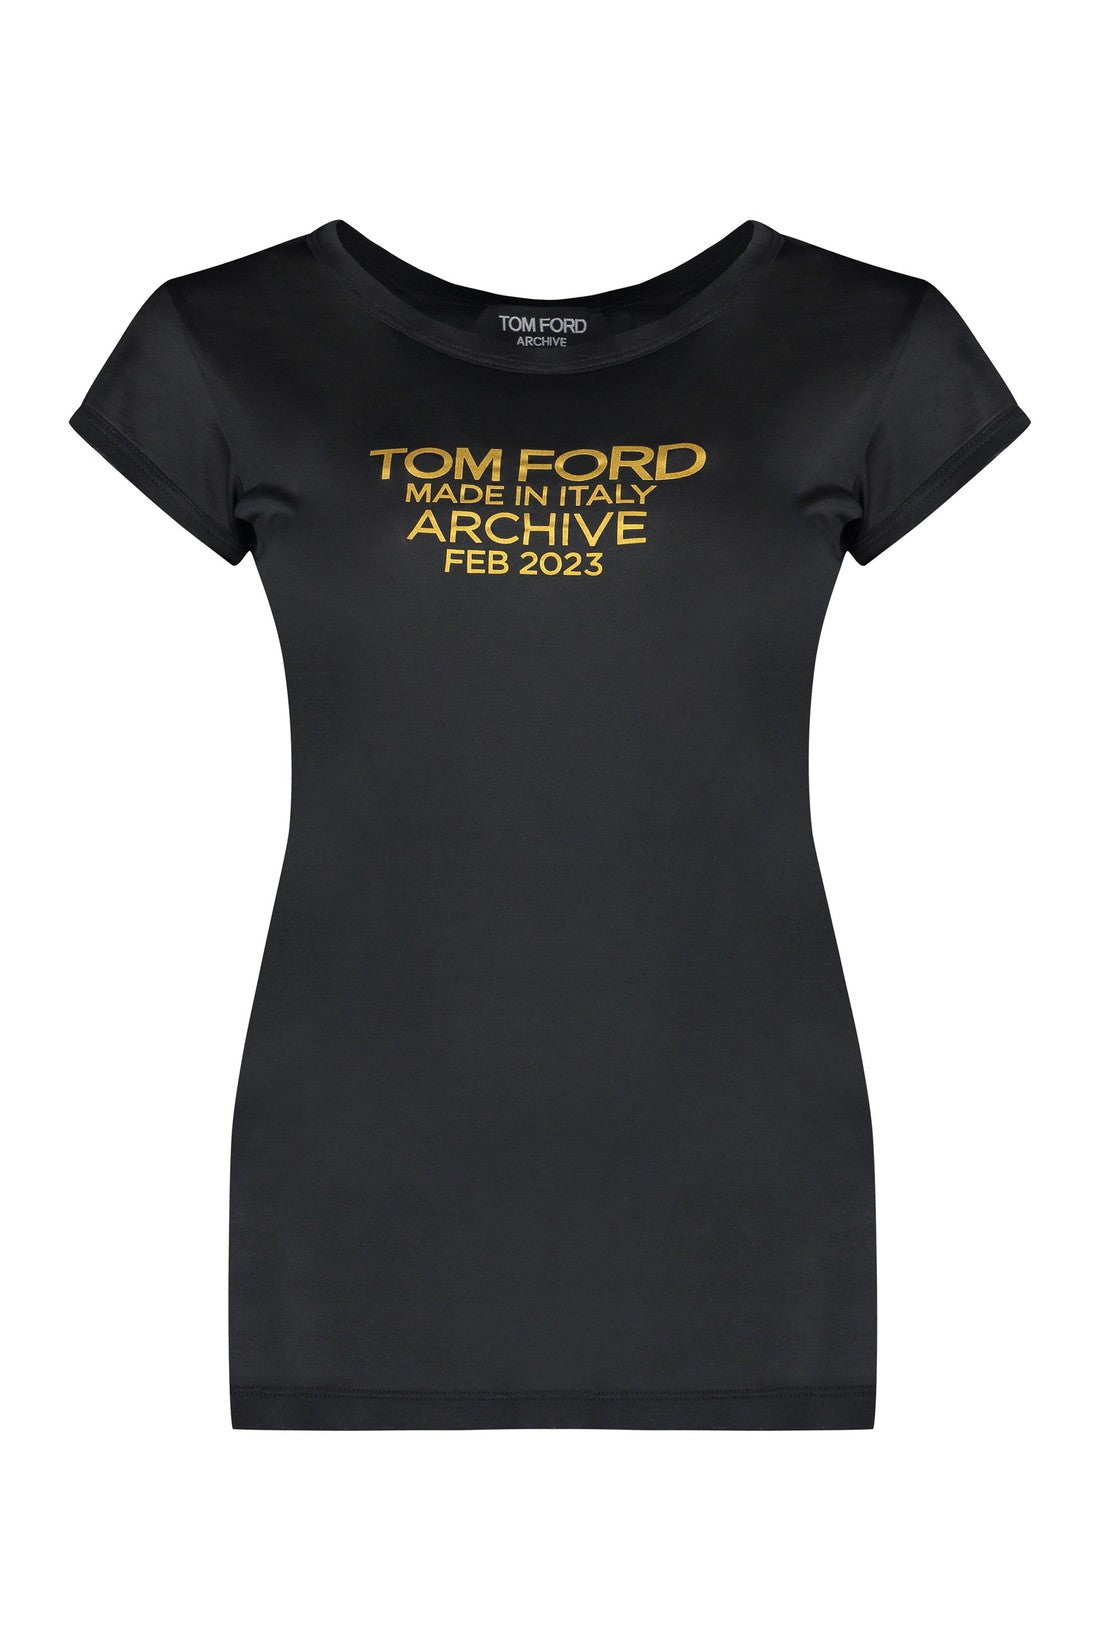 Tom Ford-OUTLET-SALE-Silk T-shirt-ARCHIVIST